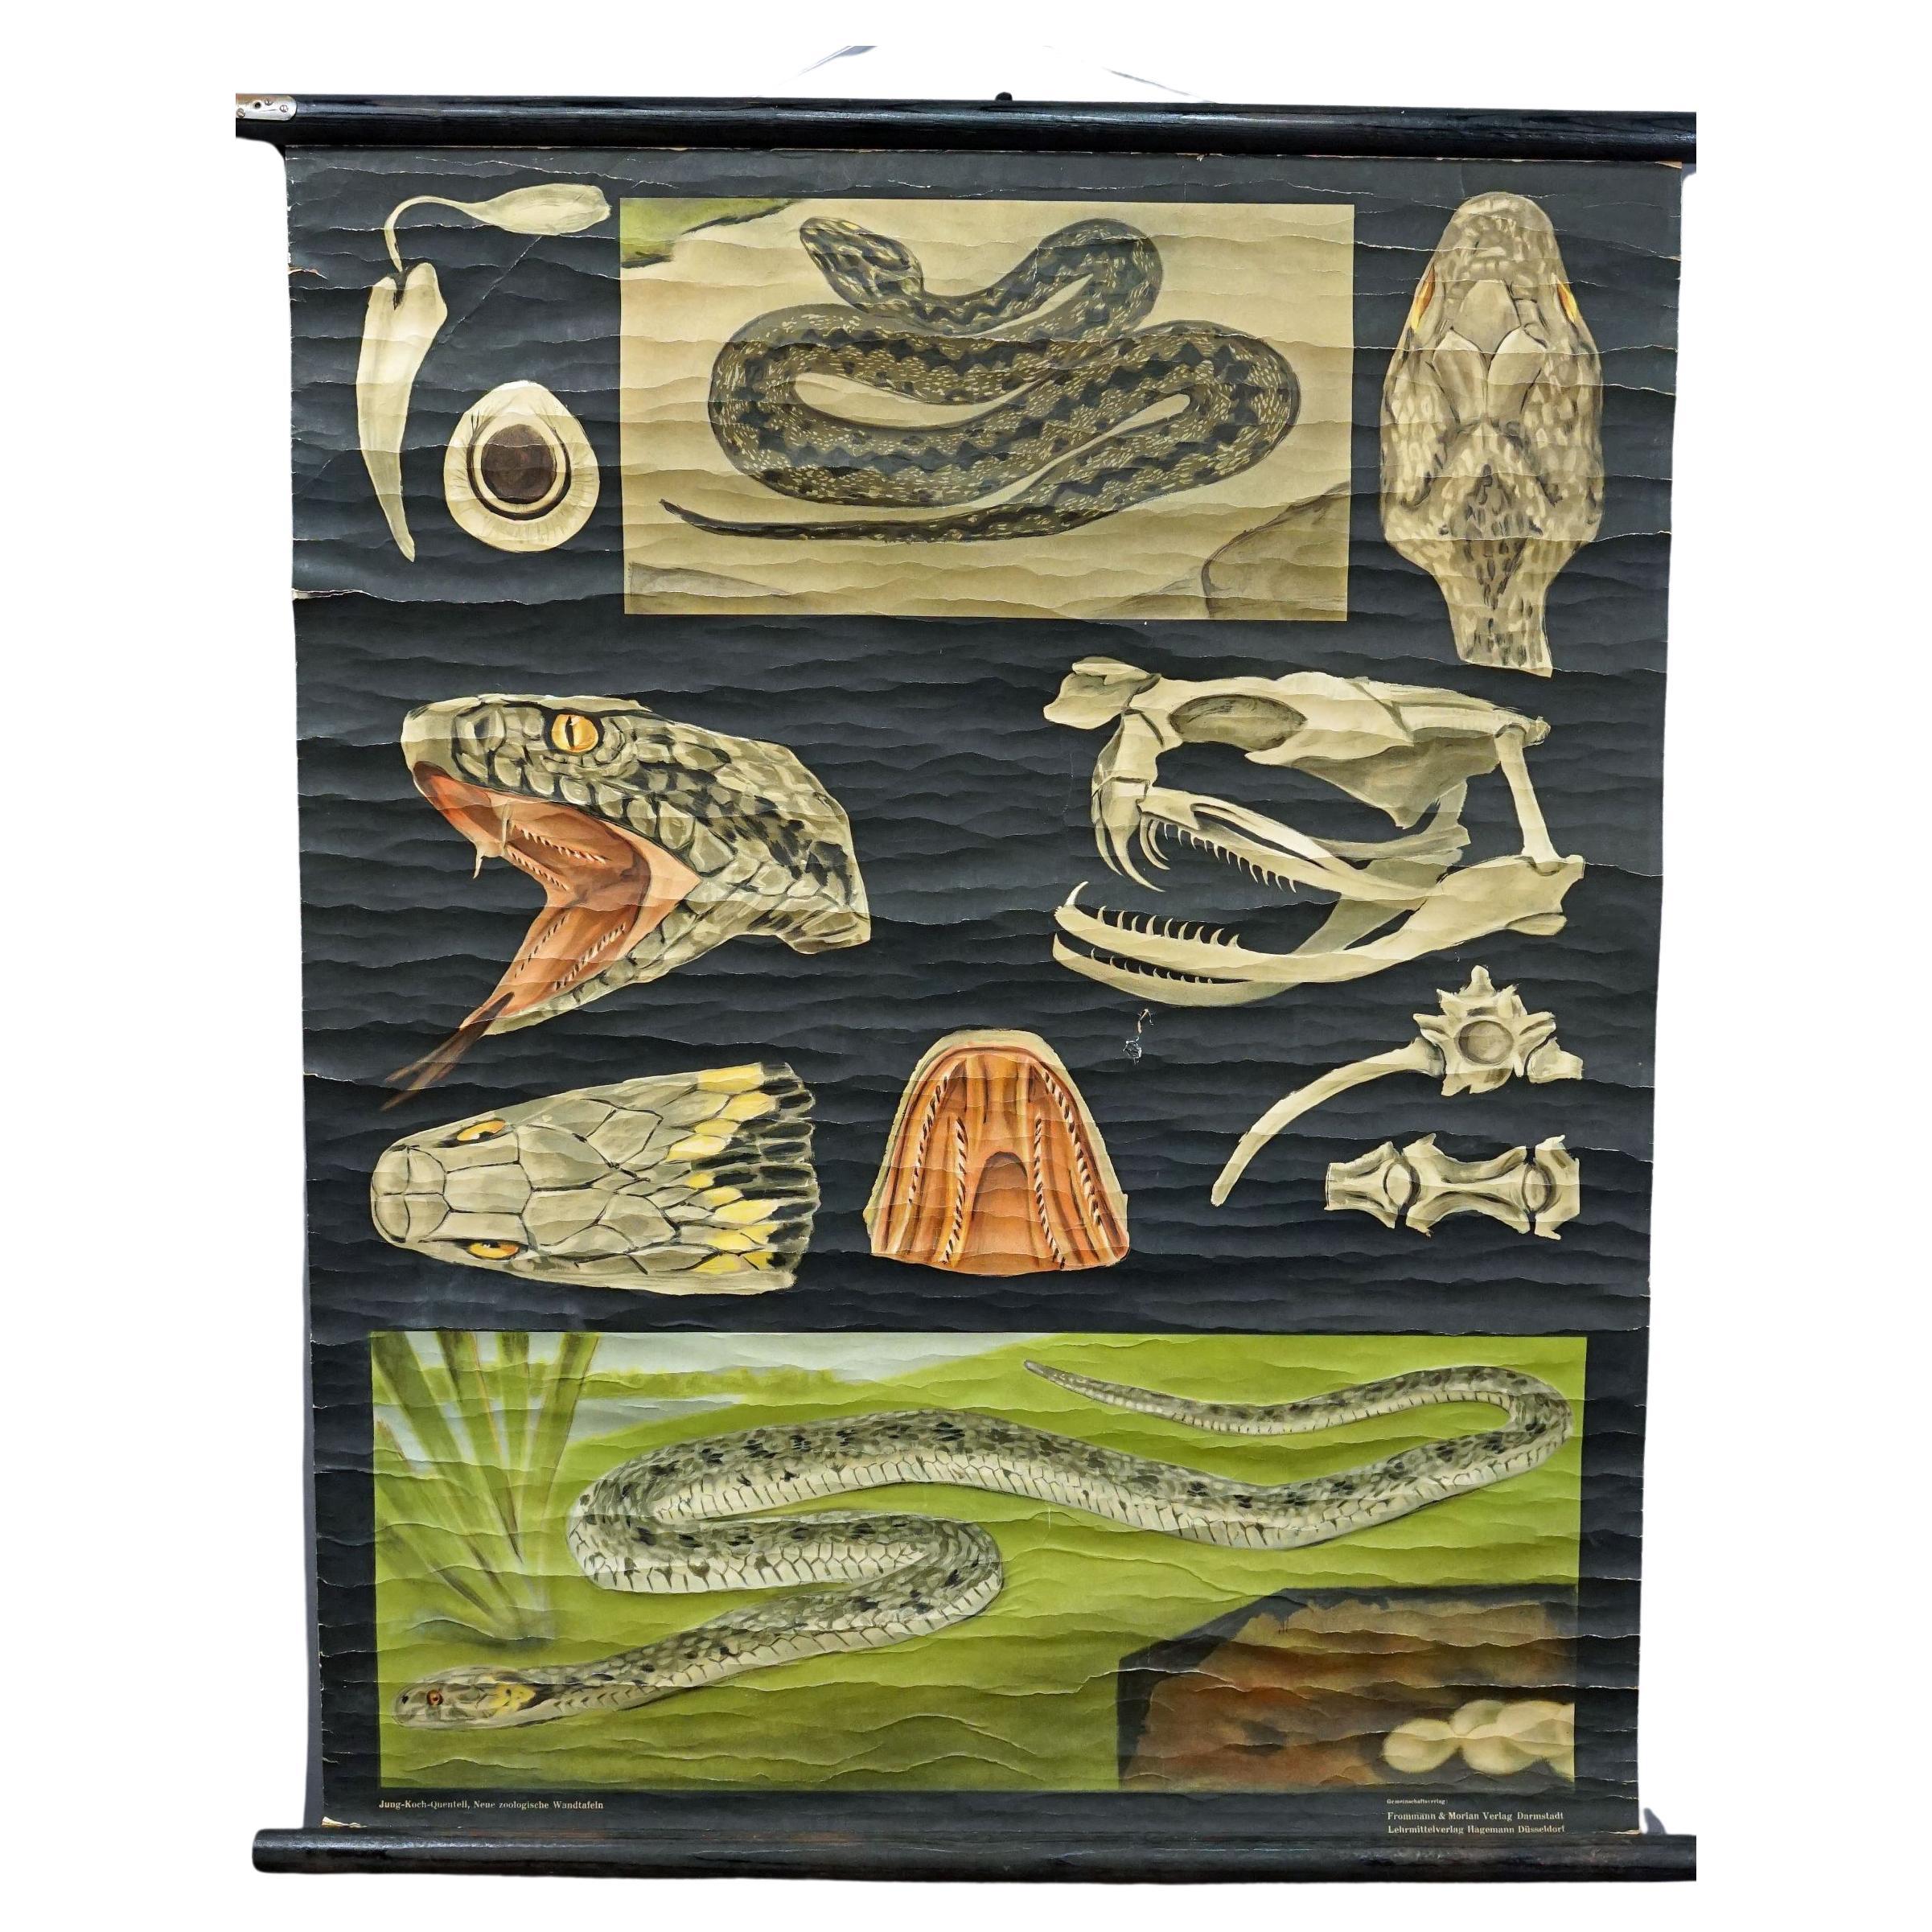 Jung Koch Quentell Old Print Mural Rollable Wall Chart Poster Snake Serpent For Sale